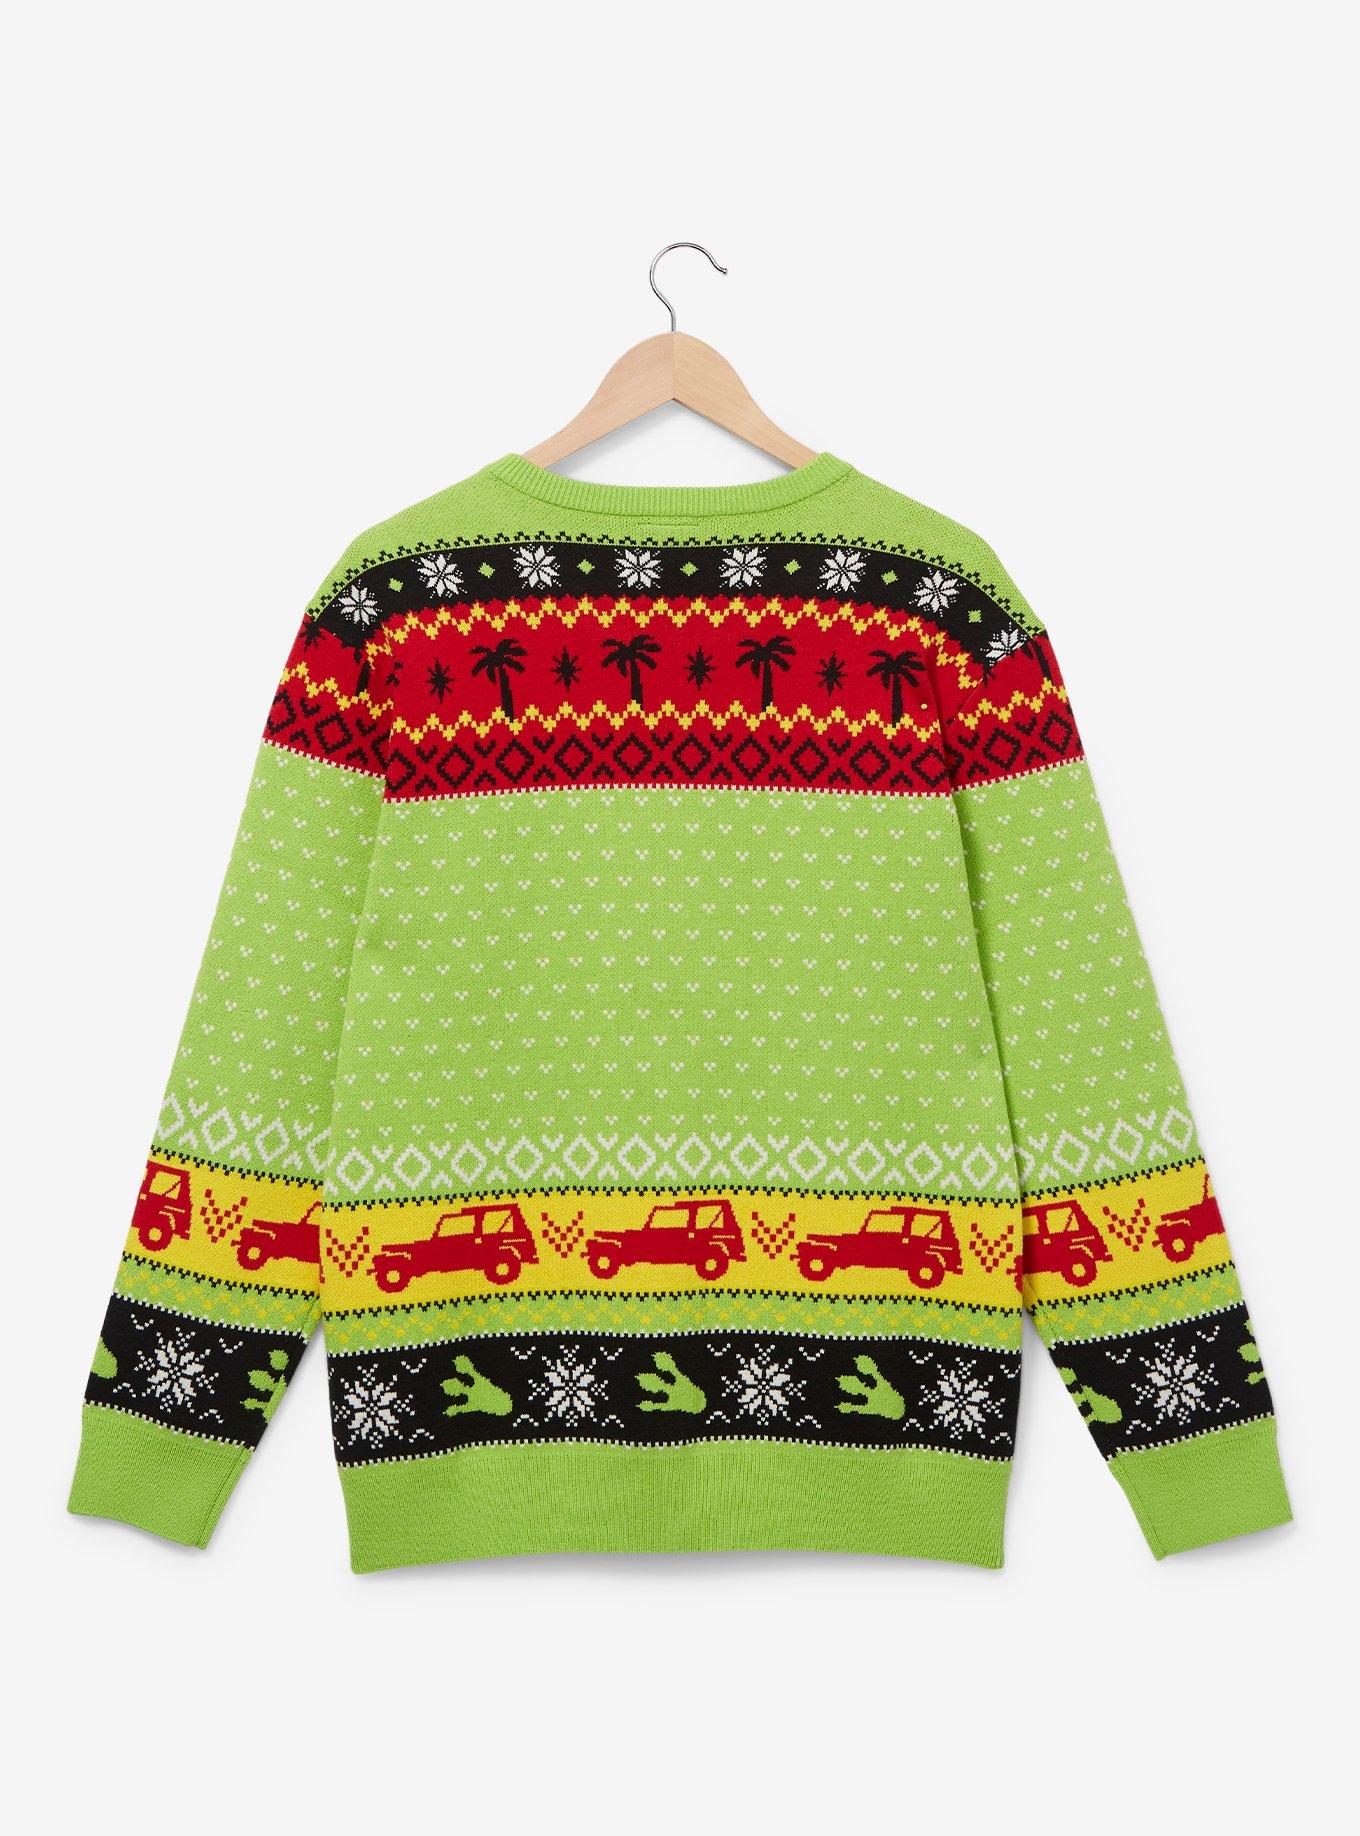 Jurassic Park Logo Patterned Holiday Sweater - BoxLunch Exclusive, GREEN, alternate